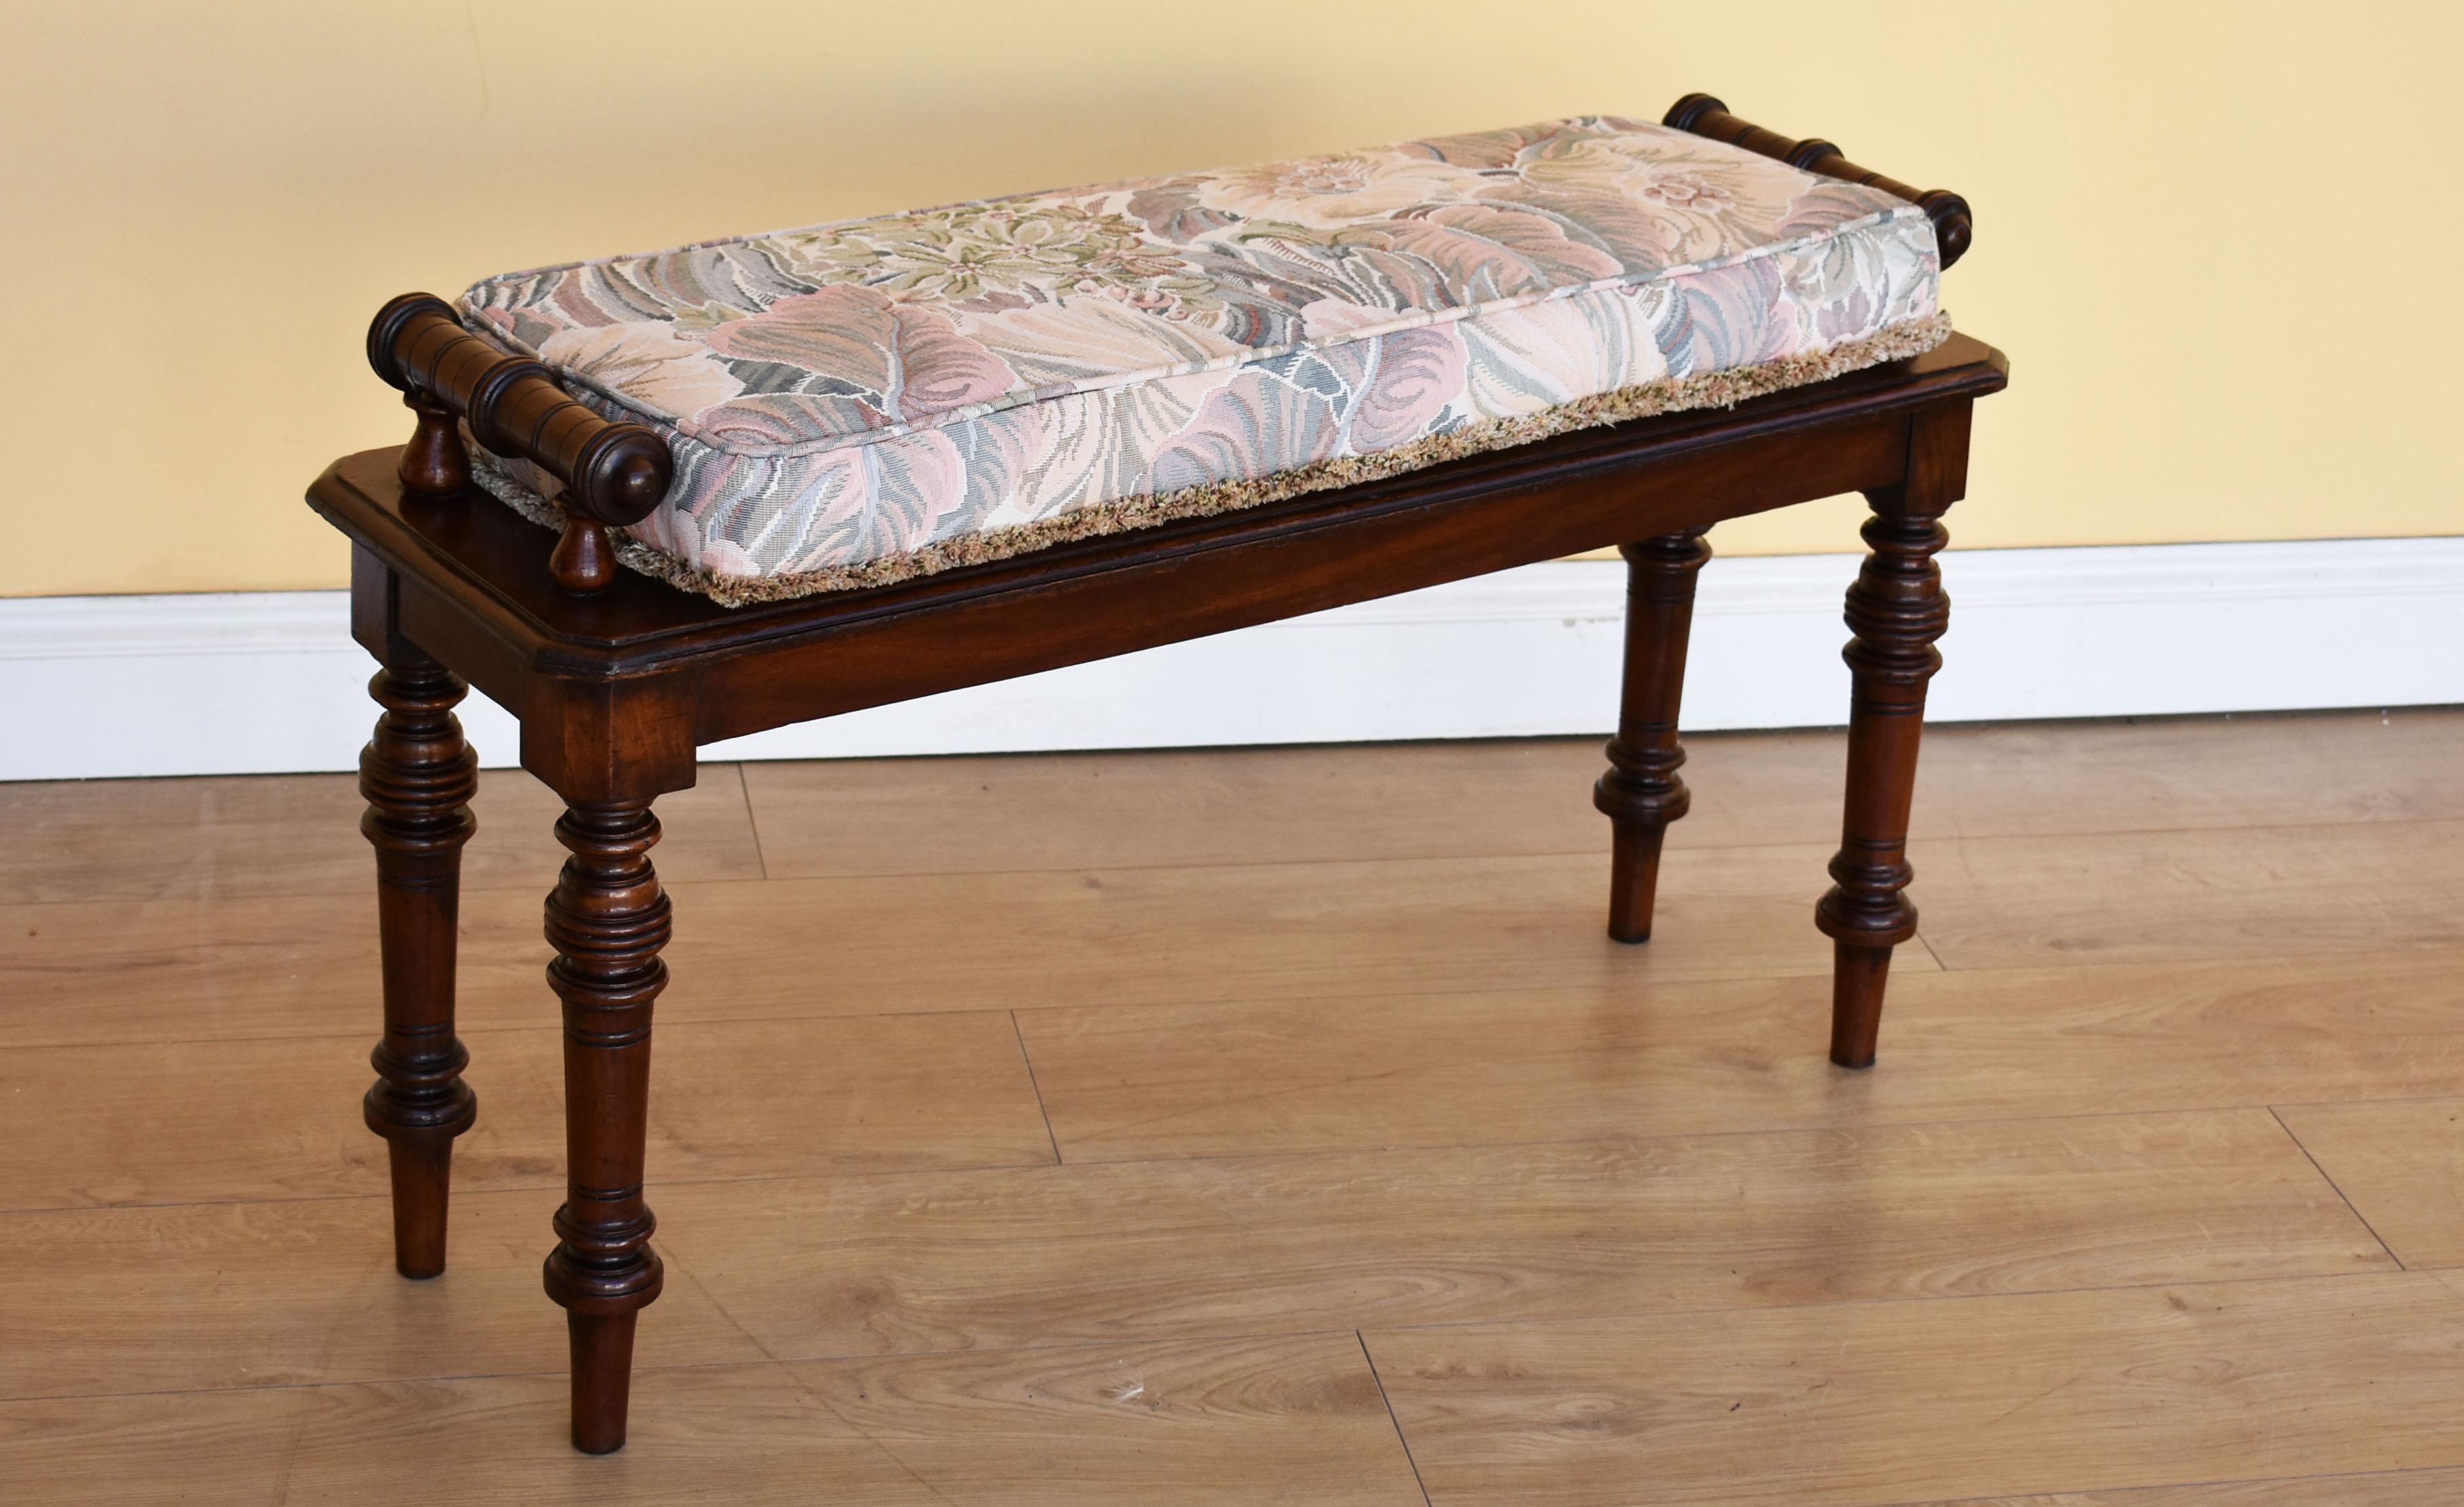 Victorian mahogany window seat in very nice condition having been polished by hand, the seat has nice turned hand rests and stands on elegant turned legs. Includes removable cushion. Ideal seat to place under a window, hall or end of bed.